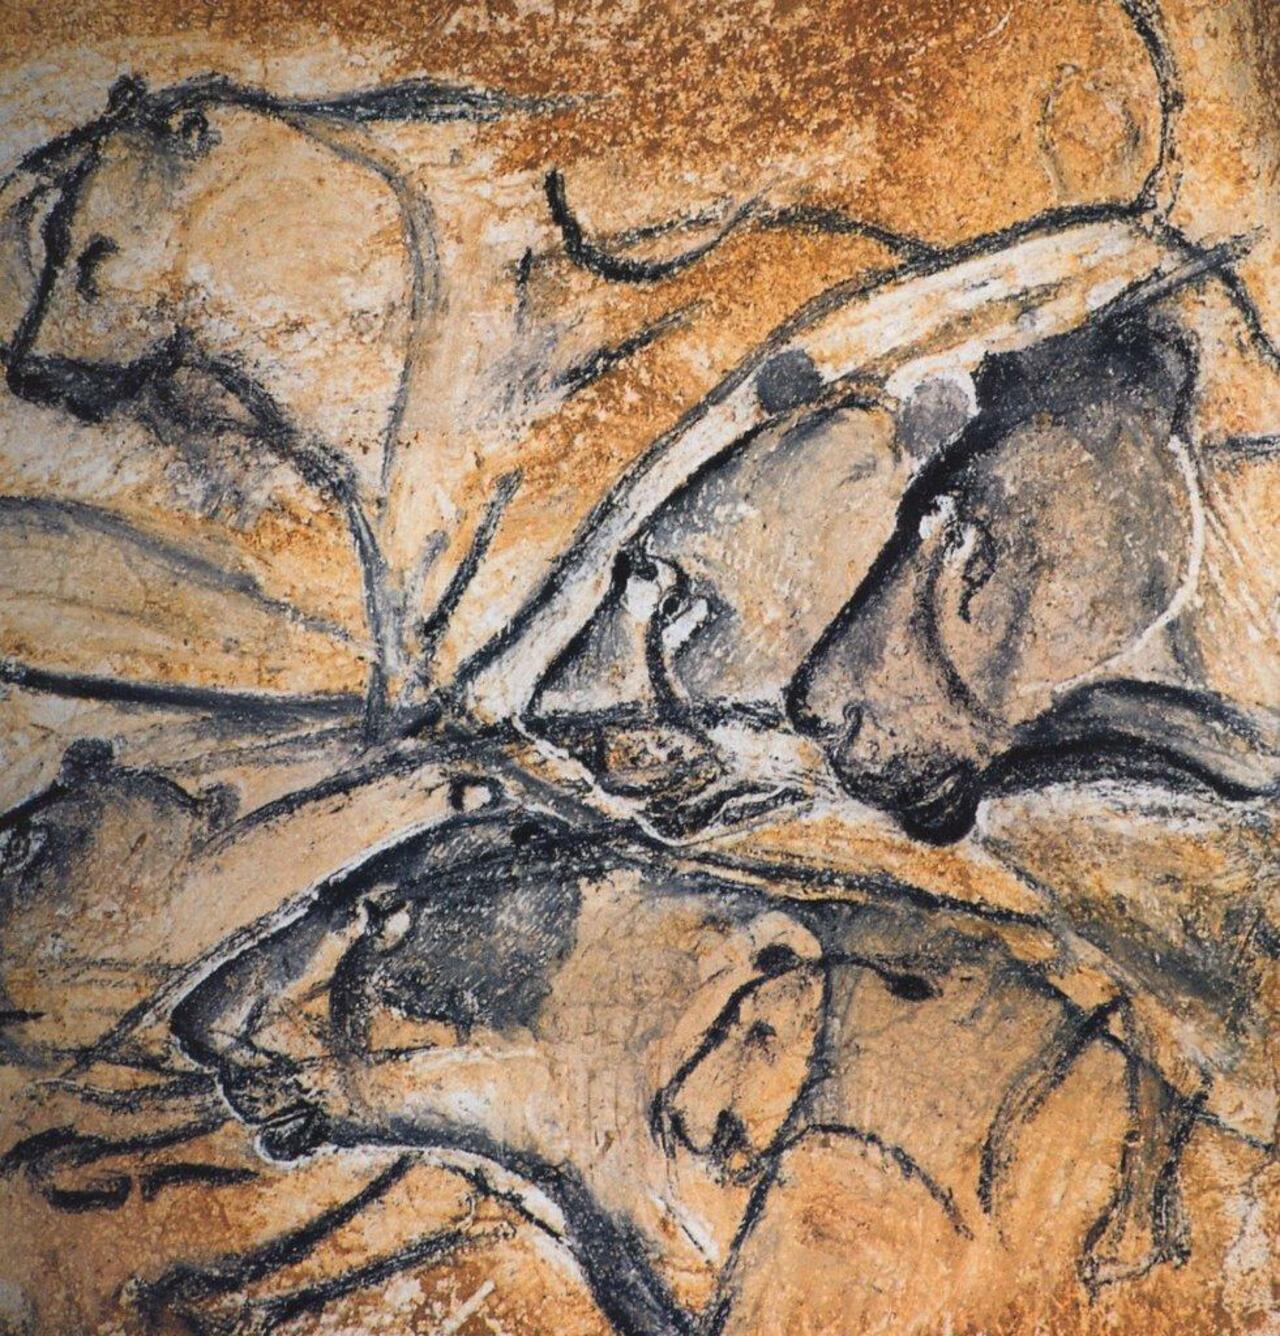 #StreetartSaturday Well preserved #CavePaintings in Chauvet Cave may be nothing more than 32,000 yr old #Streetart https://t.co/a0ZESyTfyh